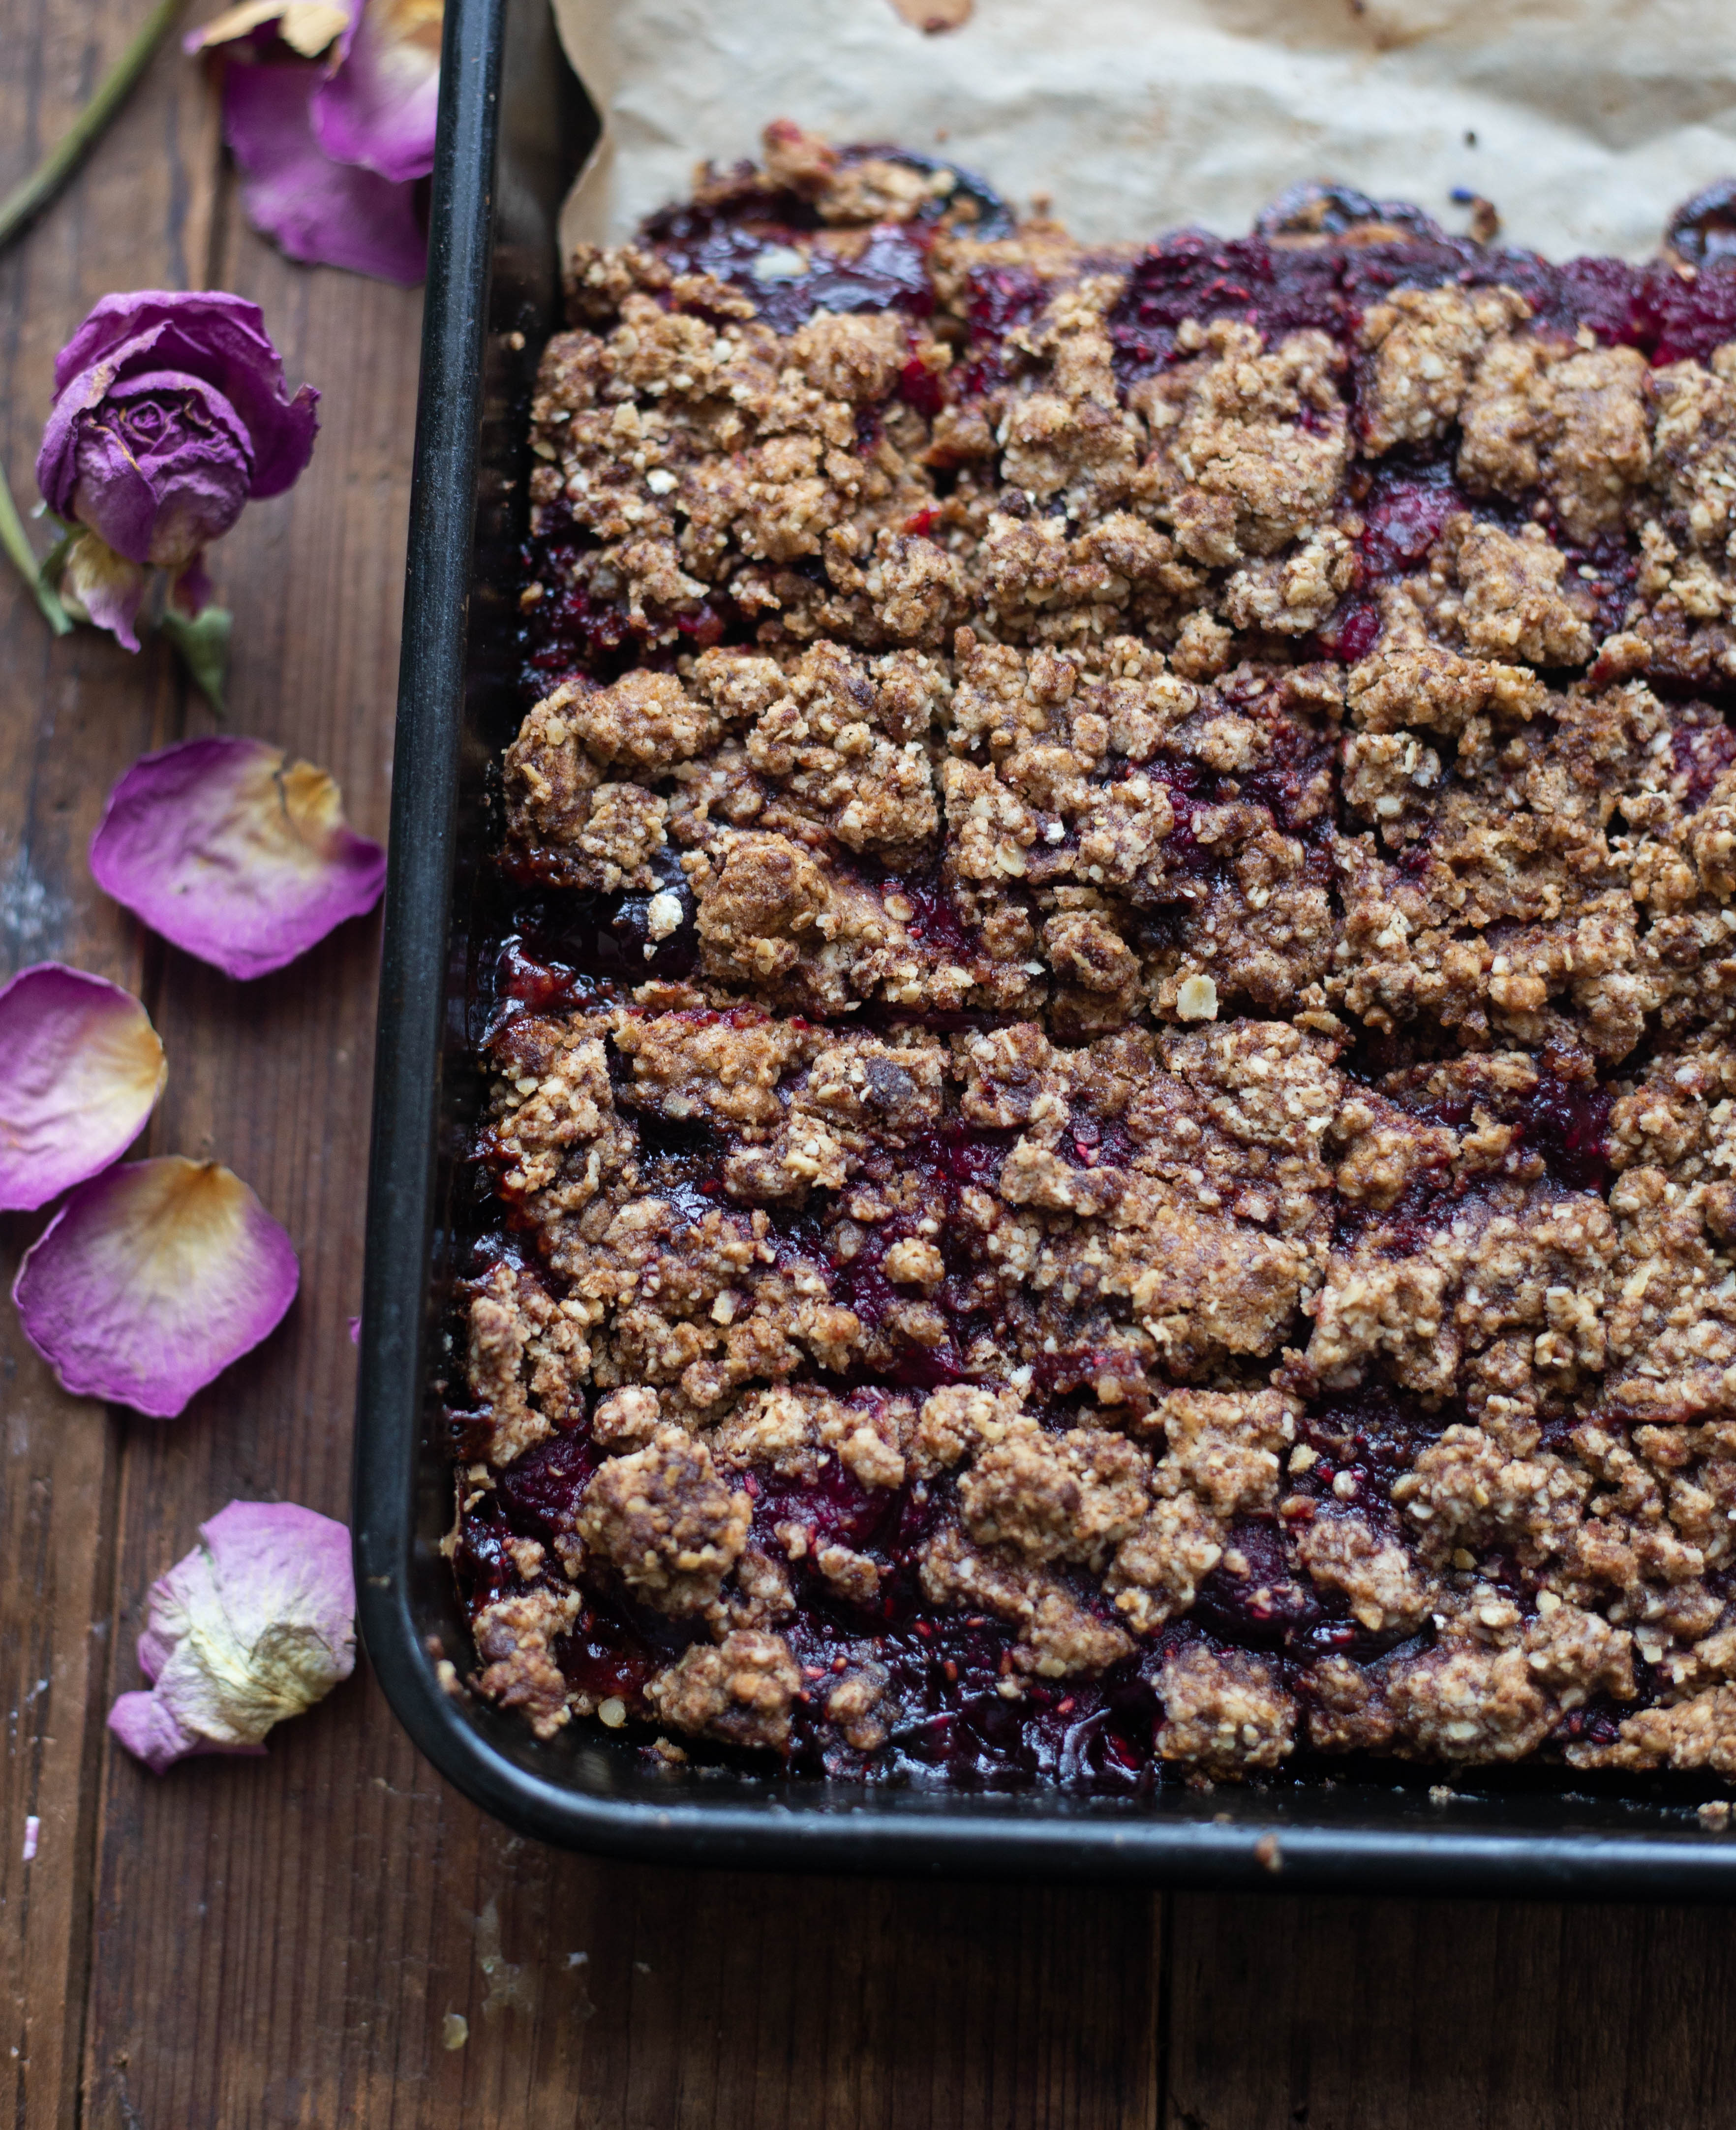 Cherry and Raspberry Crumble Breakfast Bars in baking tray with flowers next to tray